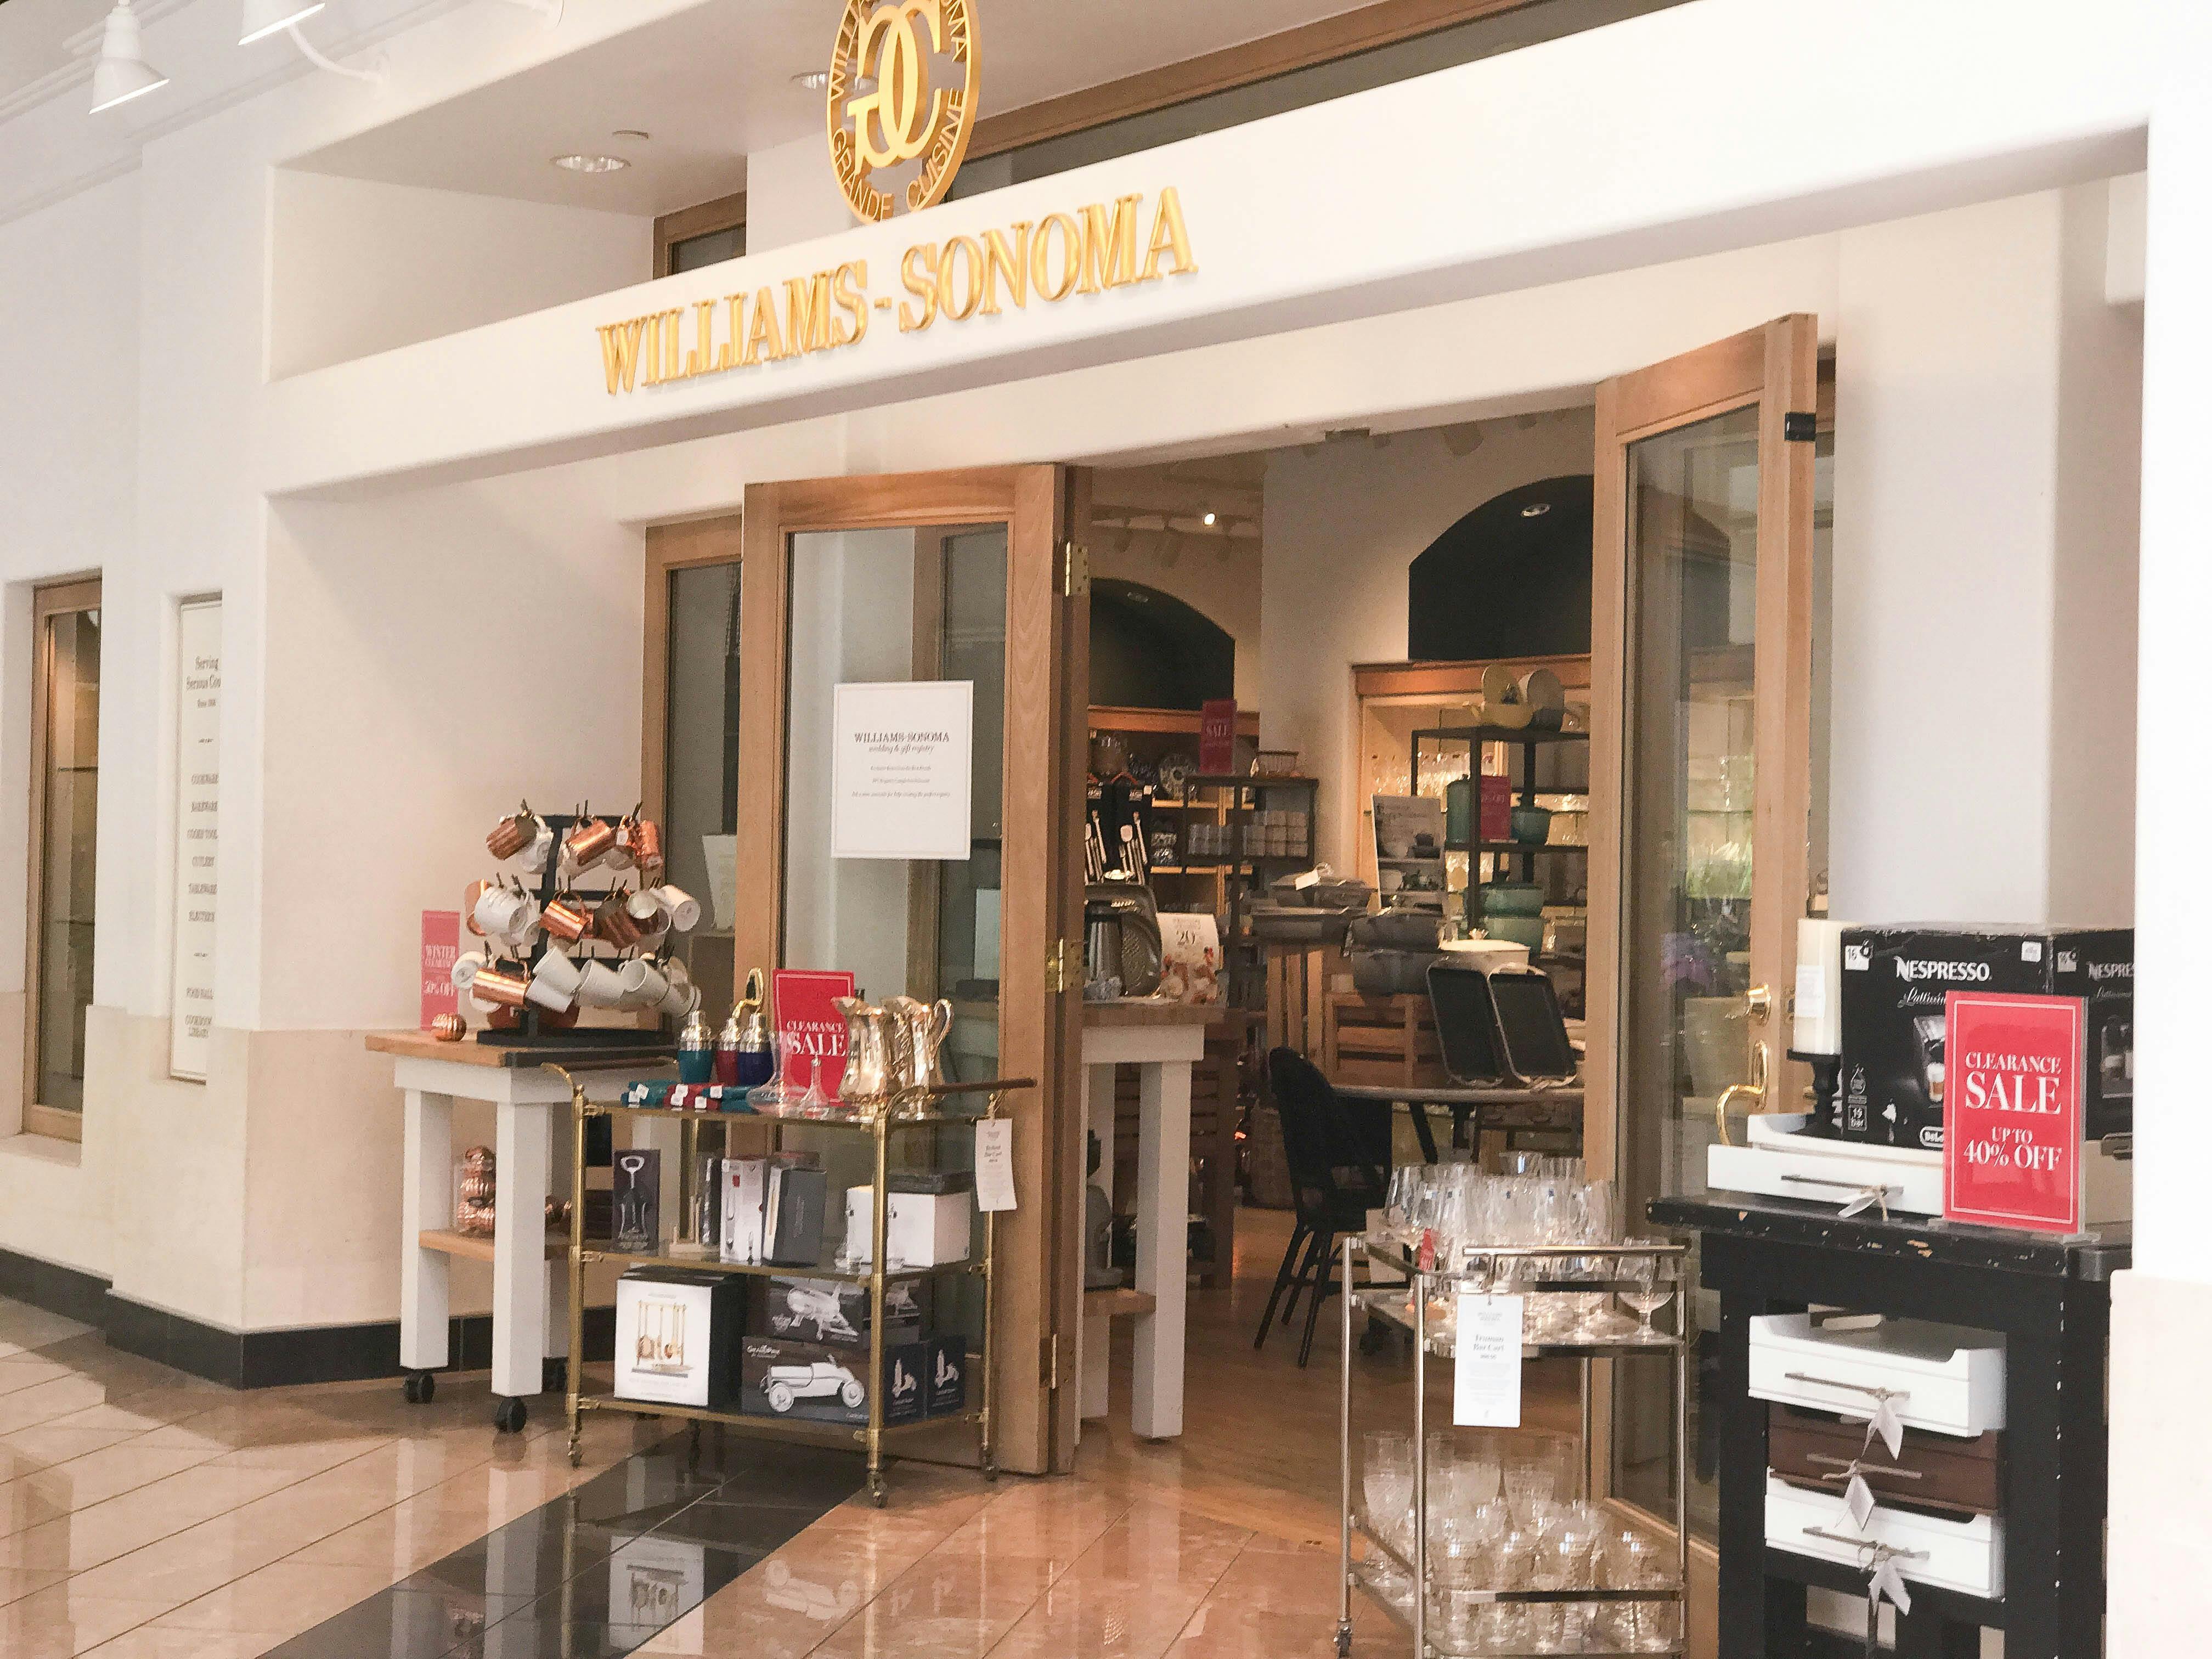 23 Secret Tips to Help You Afford Williams-Sonoma - The Krazy